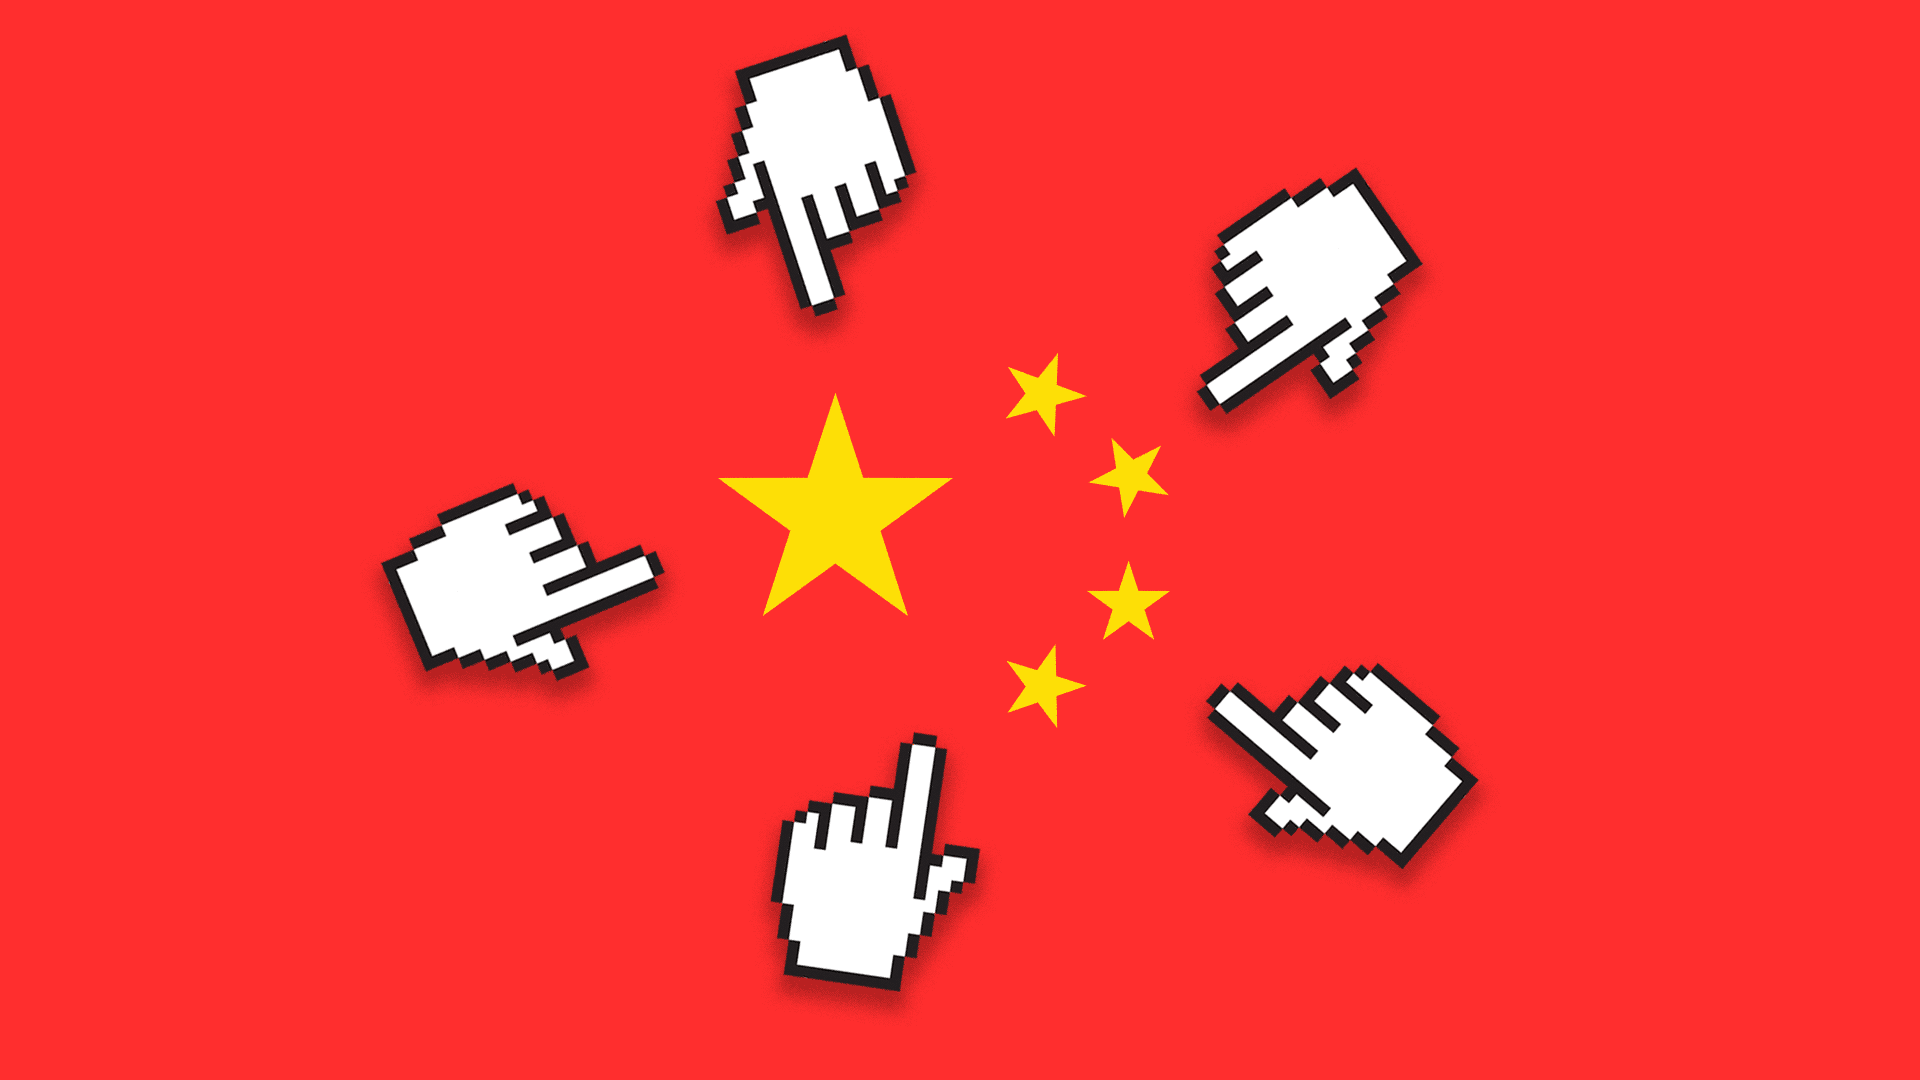 A gif shows an ambition of several cursor-like hands, moving in and out, pointing at the stars from the Chinese flag